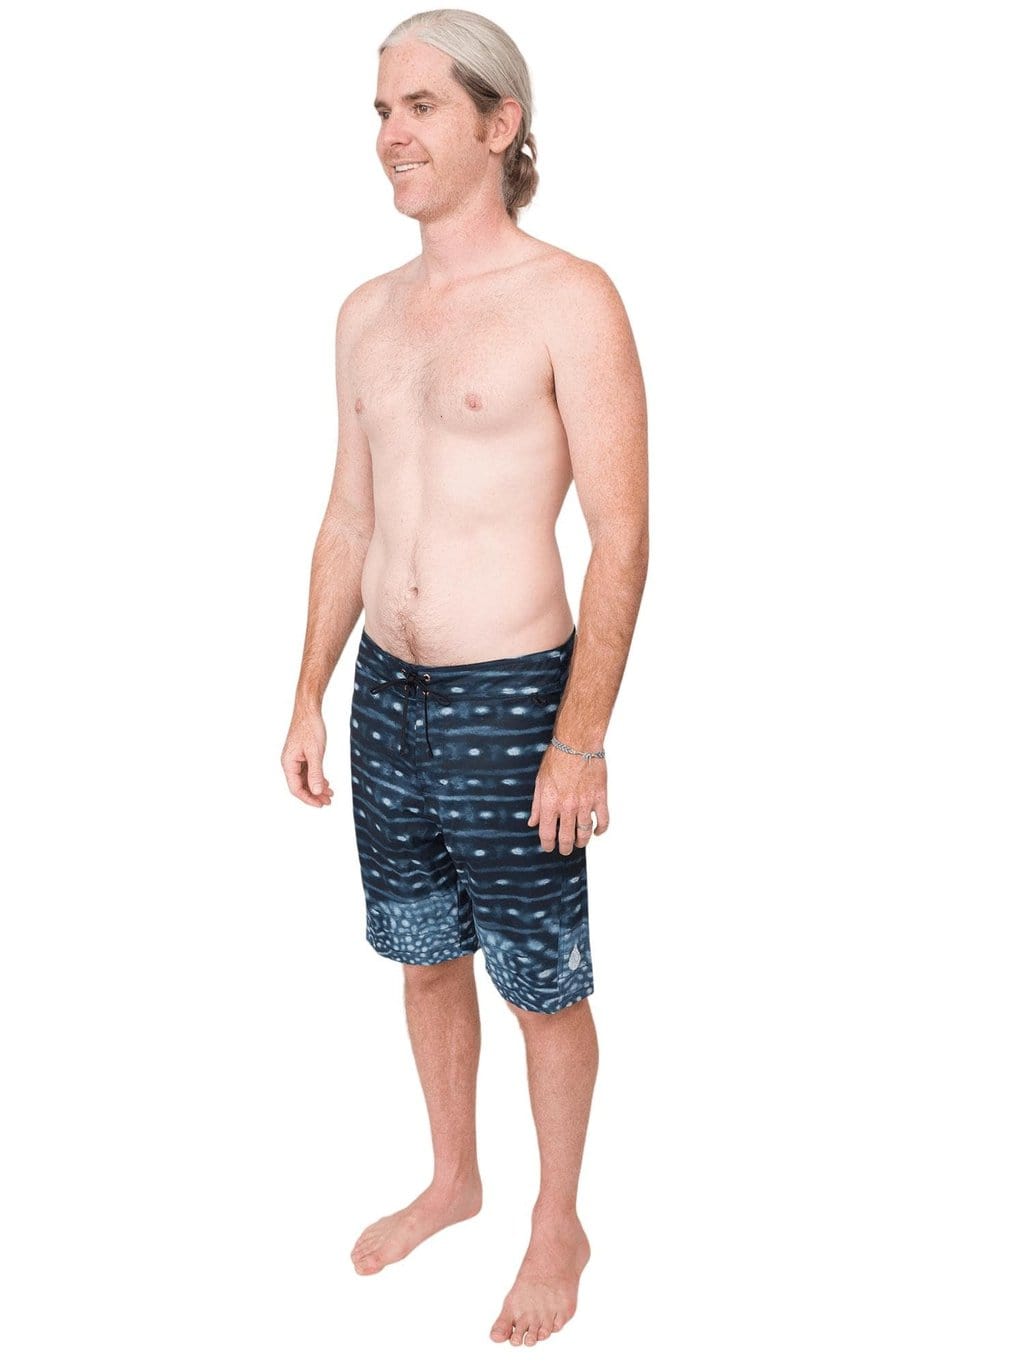 Model: Patrick is the CEO and founder of Waterlust. He is 6&#39;1, 175 lbs and is wearing a size 33.